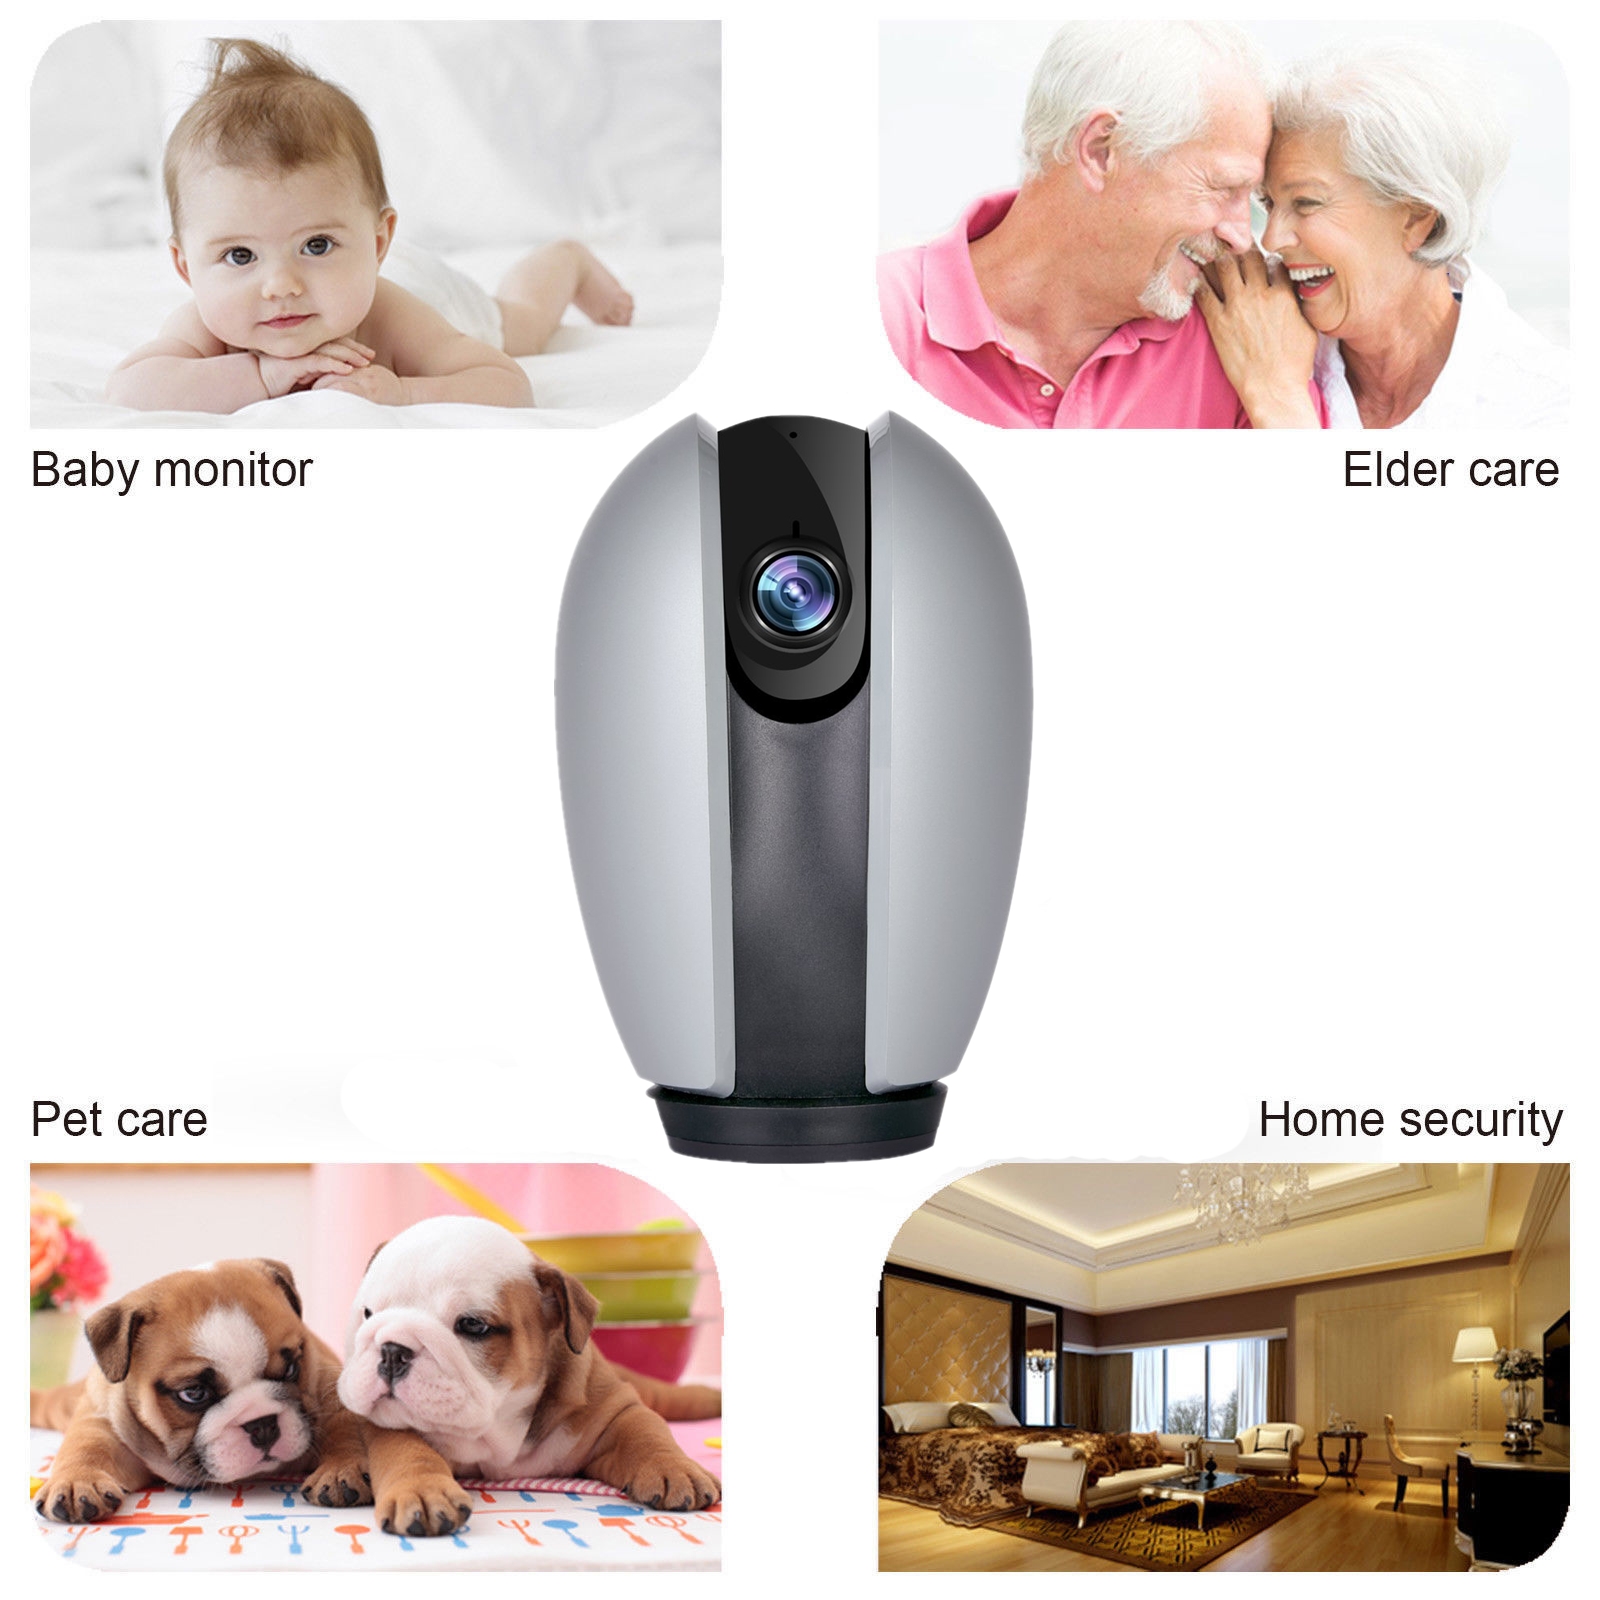 720P/1080P Hisilicon wireless IP camera with cloud storage